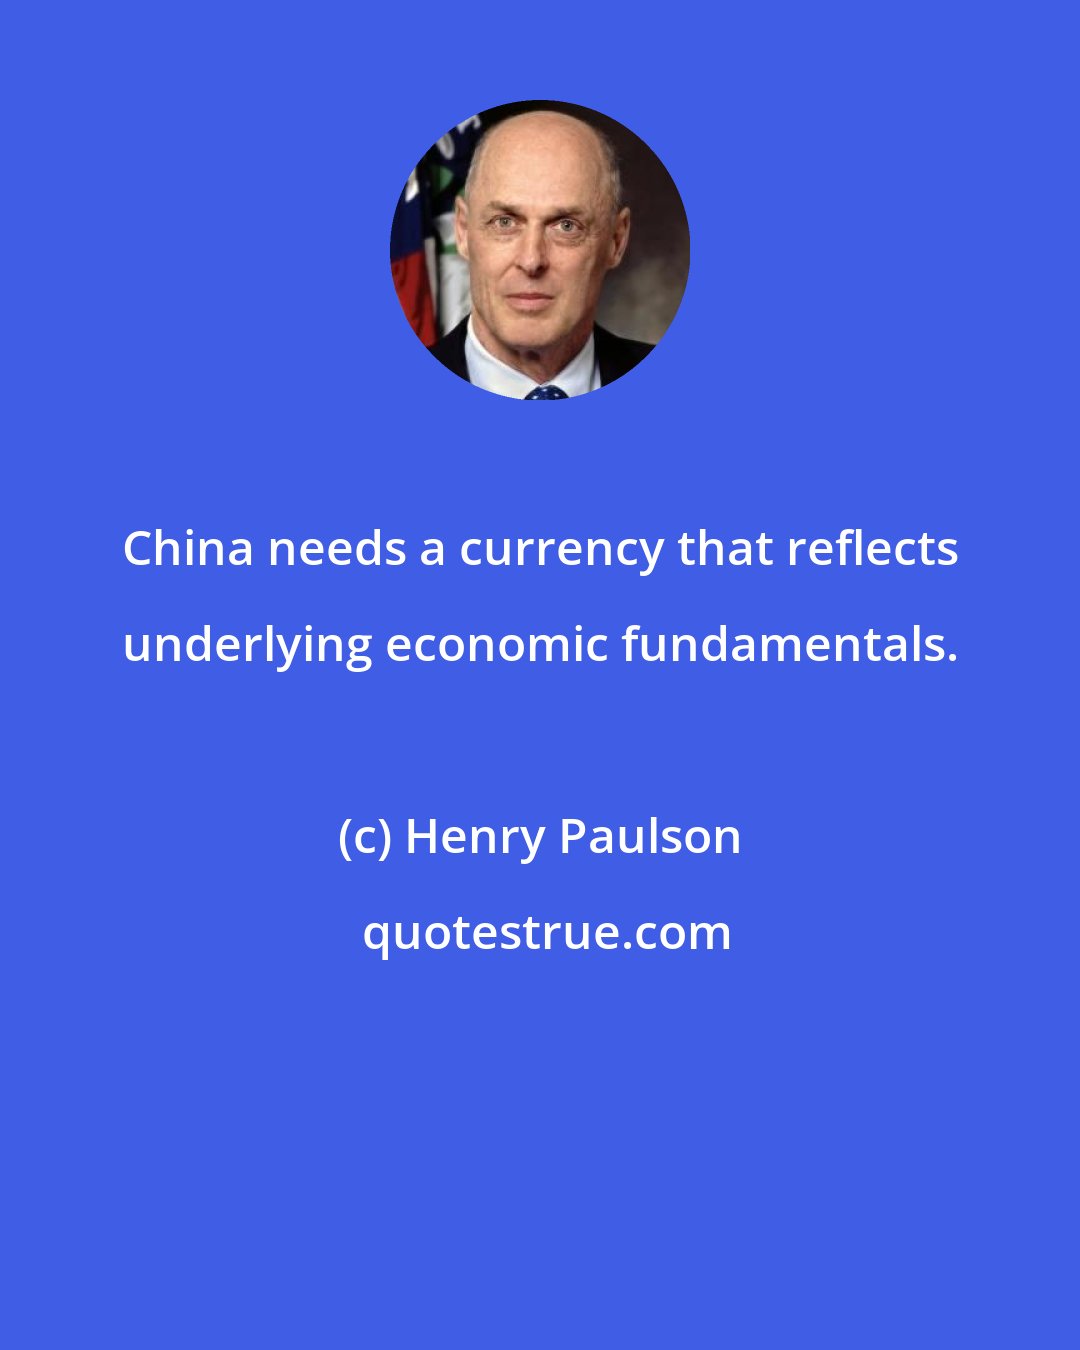 Henry Paulson: China needs a currency that reflects underlying economic fundamentals.